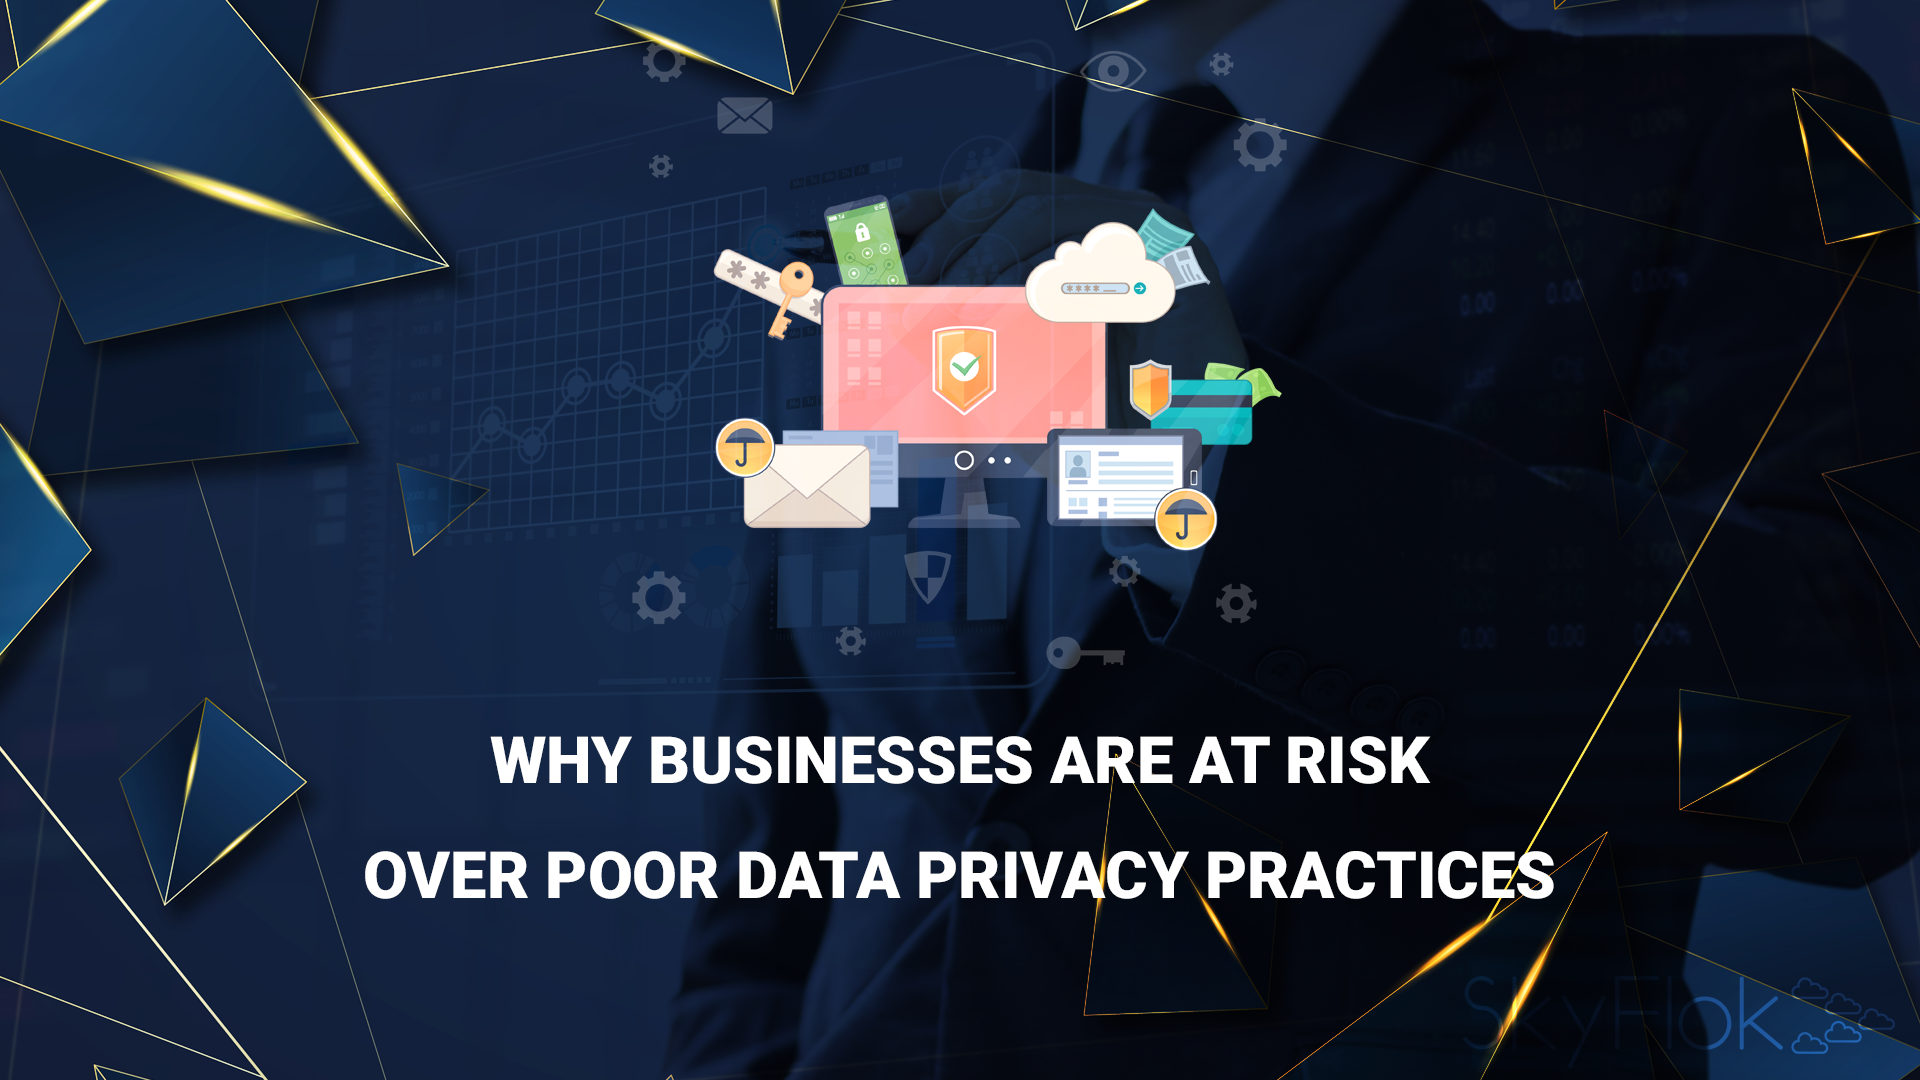 Why businesses are at risk over poor data privacy practices